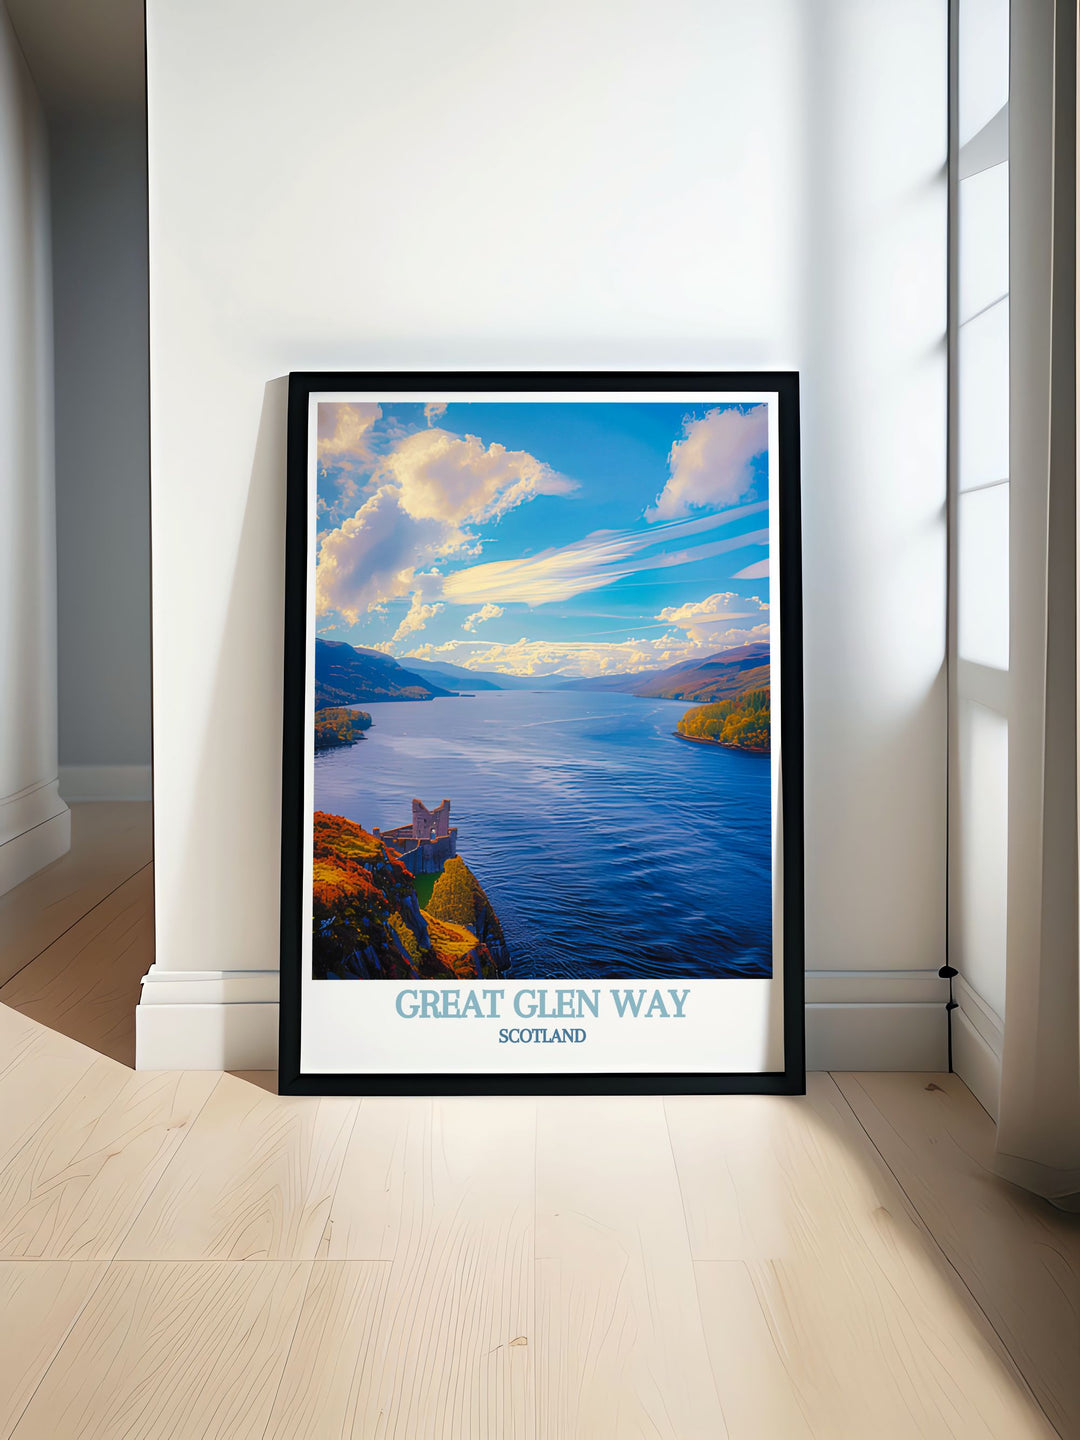 A detailed illustration of the Great Glen Way in Scotland, highlighting the historic trail winding through the stunning Scottish Highlands, perfect for enhancing your home decor with a touch of natural beauty and history.